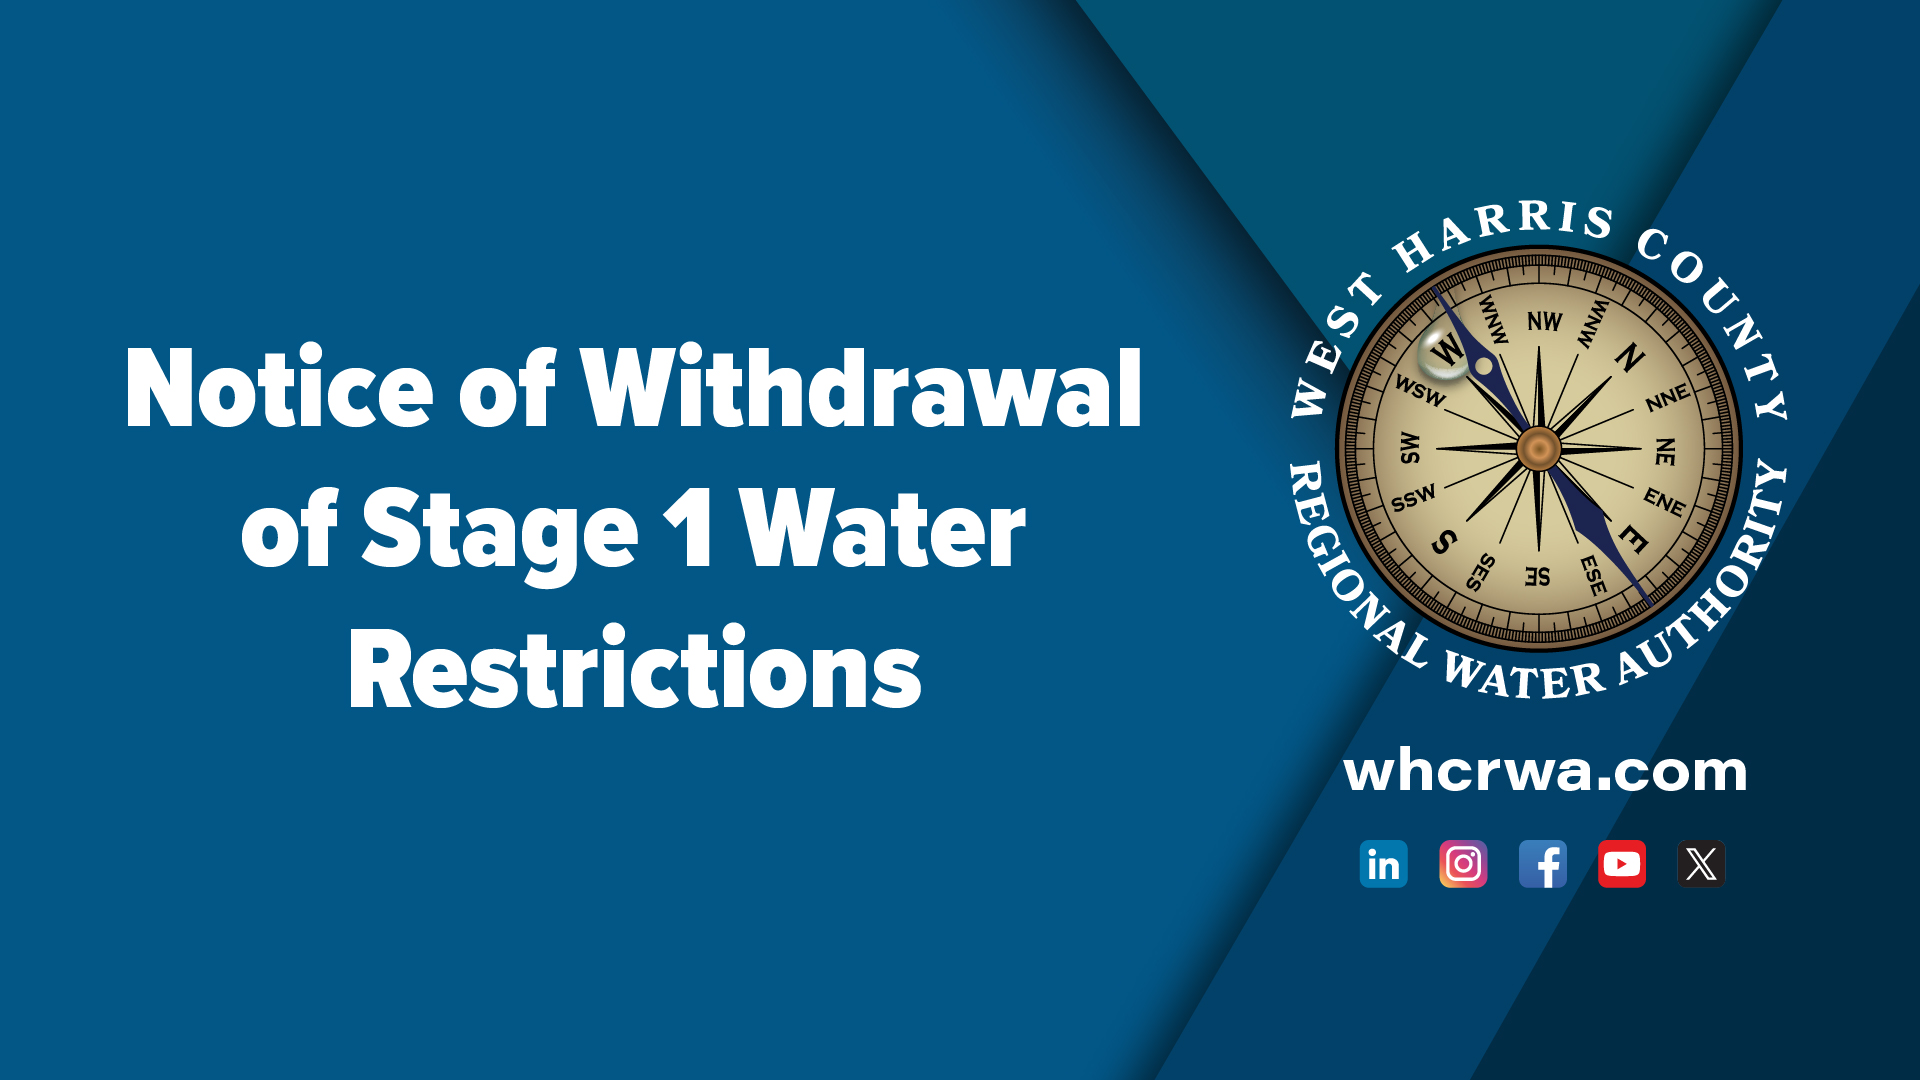 Notice of Withdrawal of Stage 1 Water Restrictions